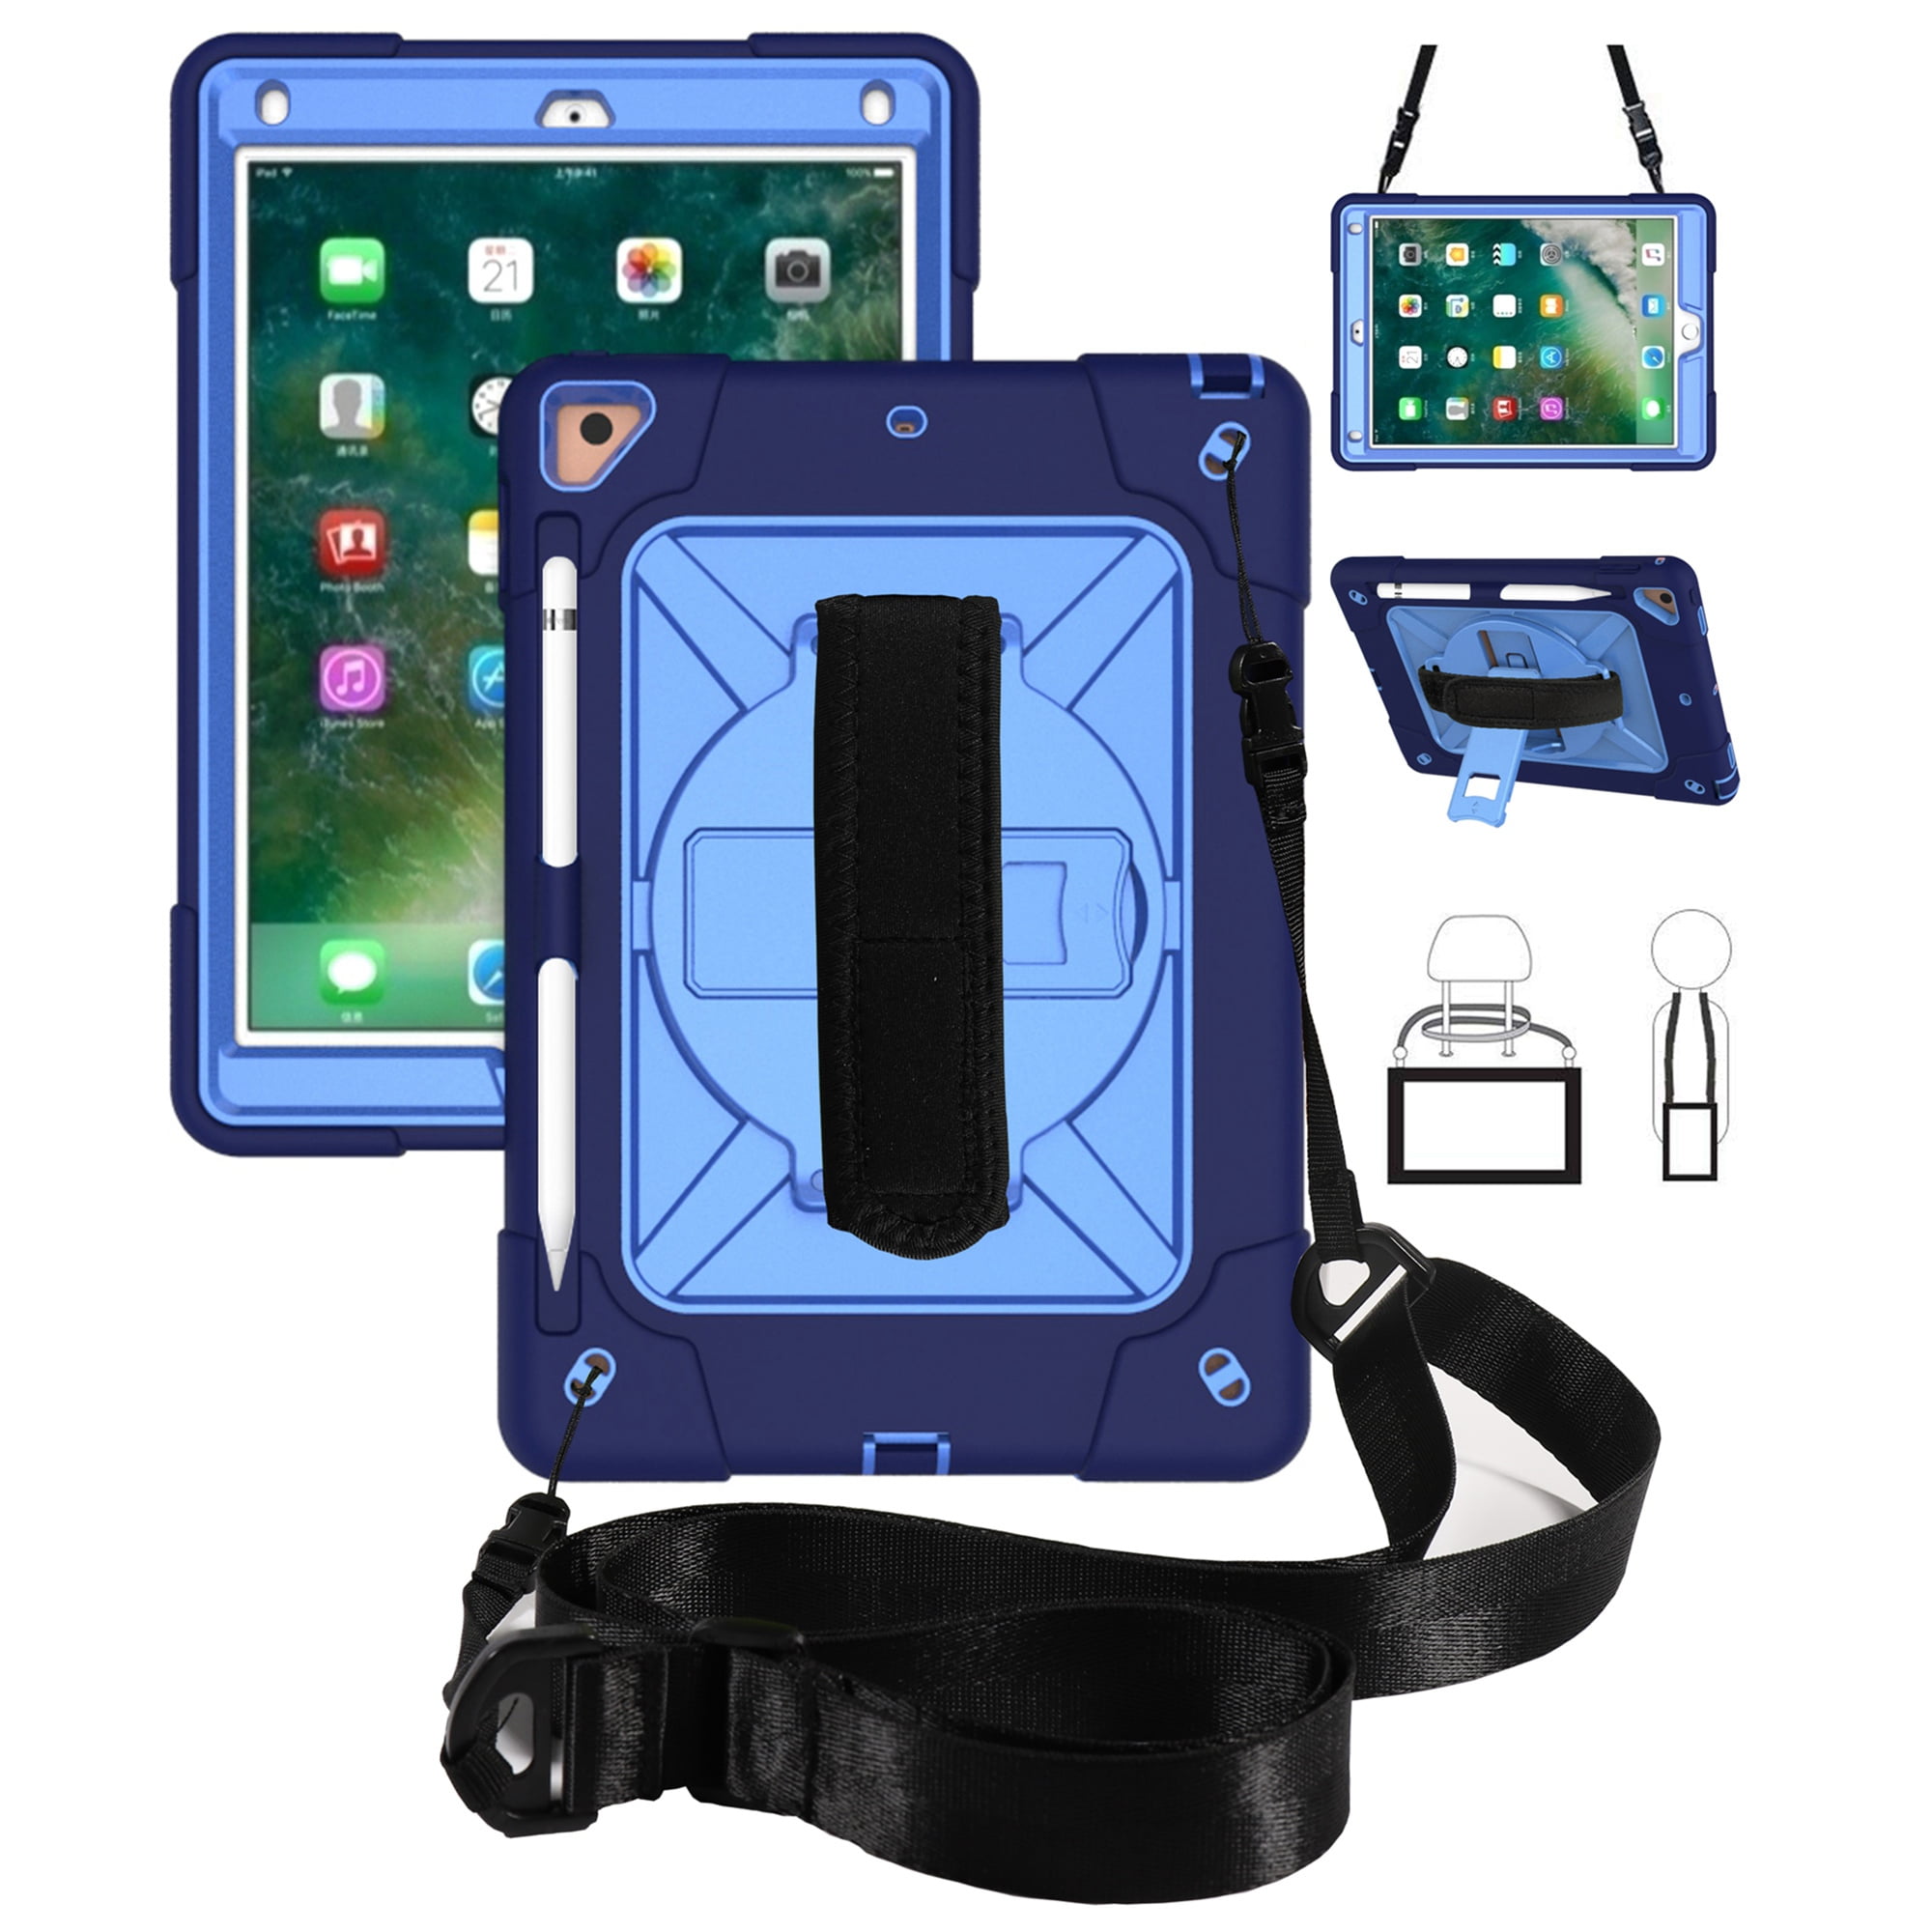 iPad Air 2 Shockproof Case, iPad Pro 9.7 Case, Dteck Heavy Duty Rugged 3  Layer Full Body Protection Case Kickstand with Shoulder Strap, Hand Strap,  Black/Rose 